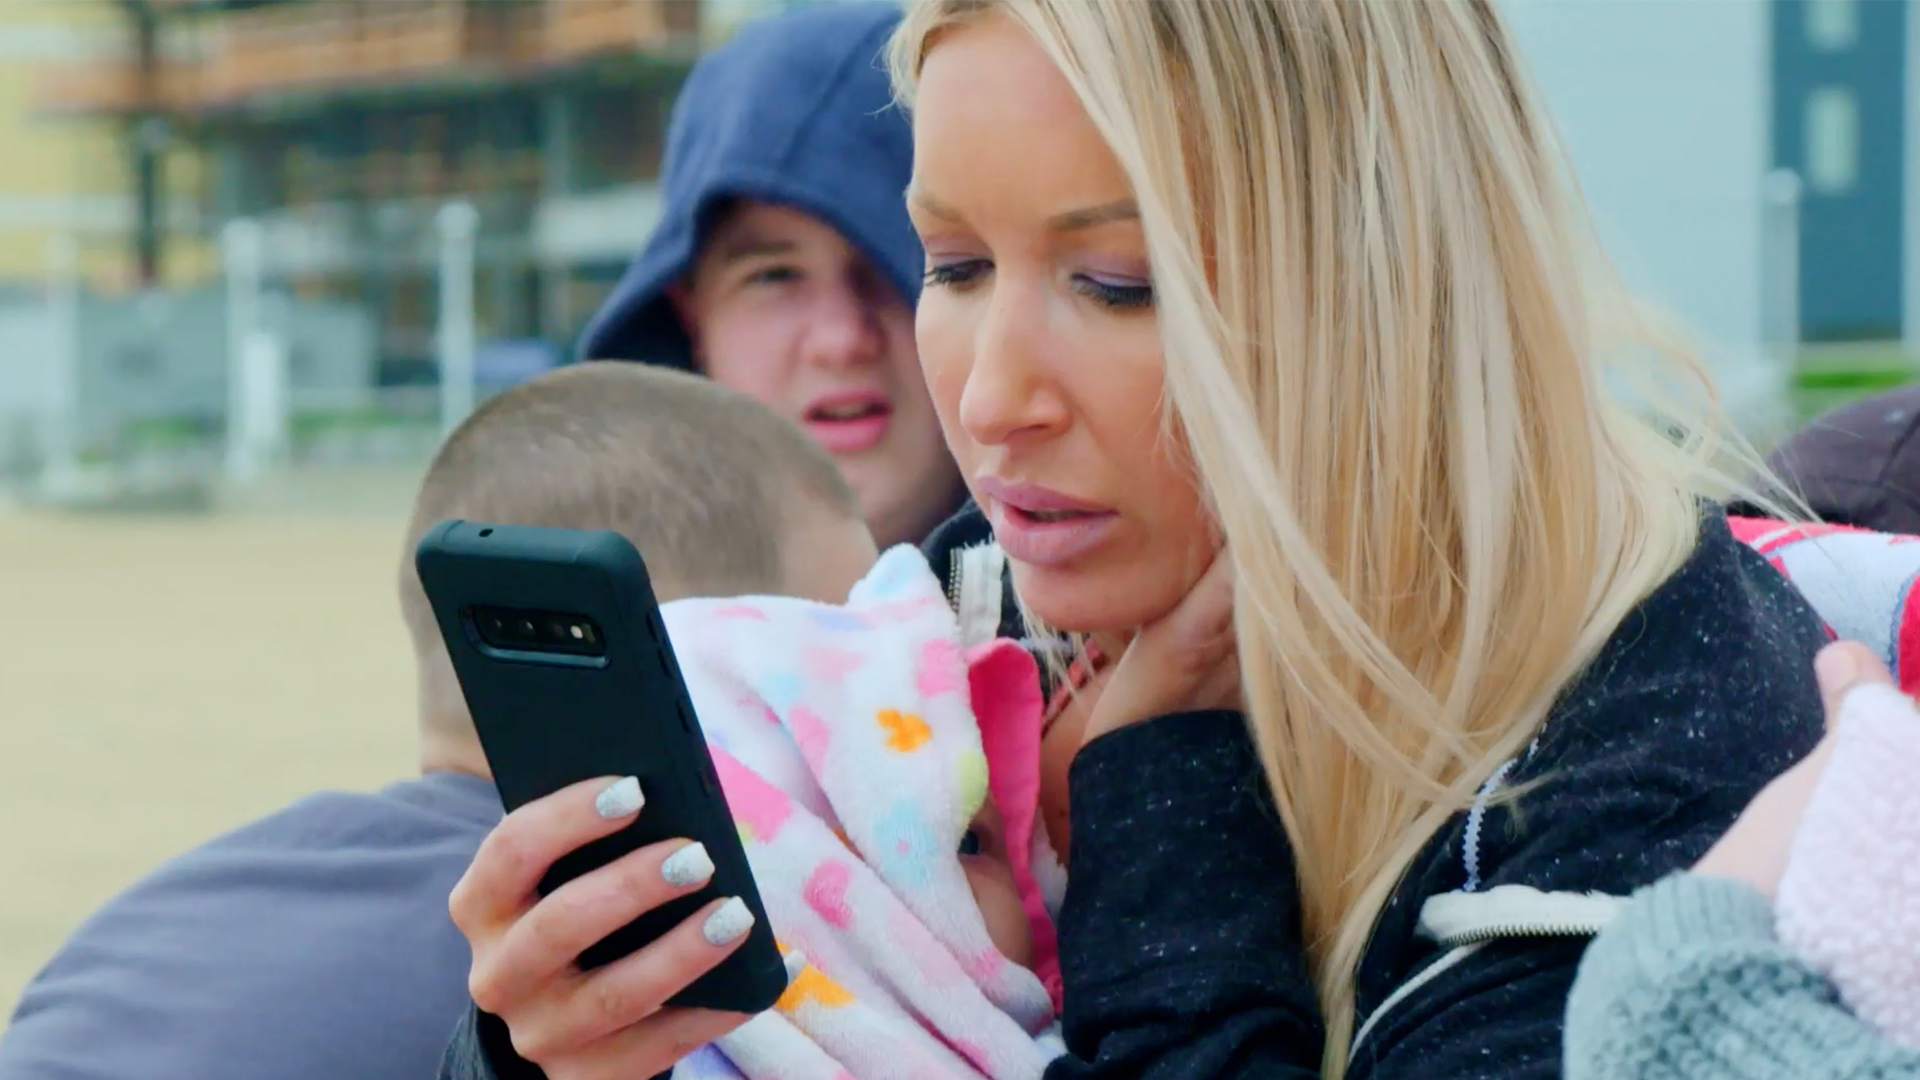 Sneak Peek: Lacey Makes a Shocking Discovery on Shane’s Phone!